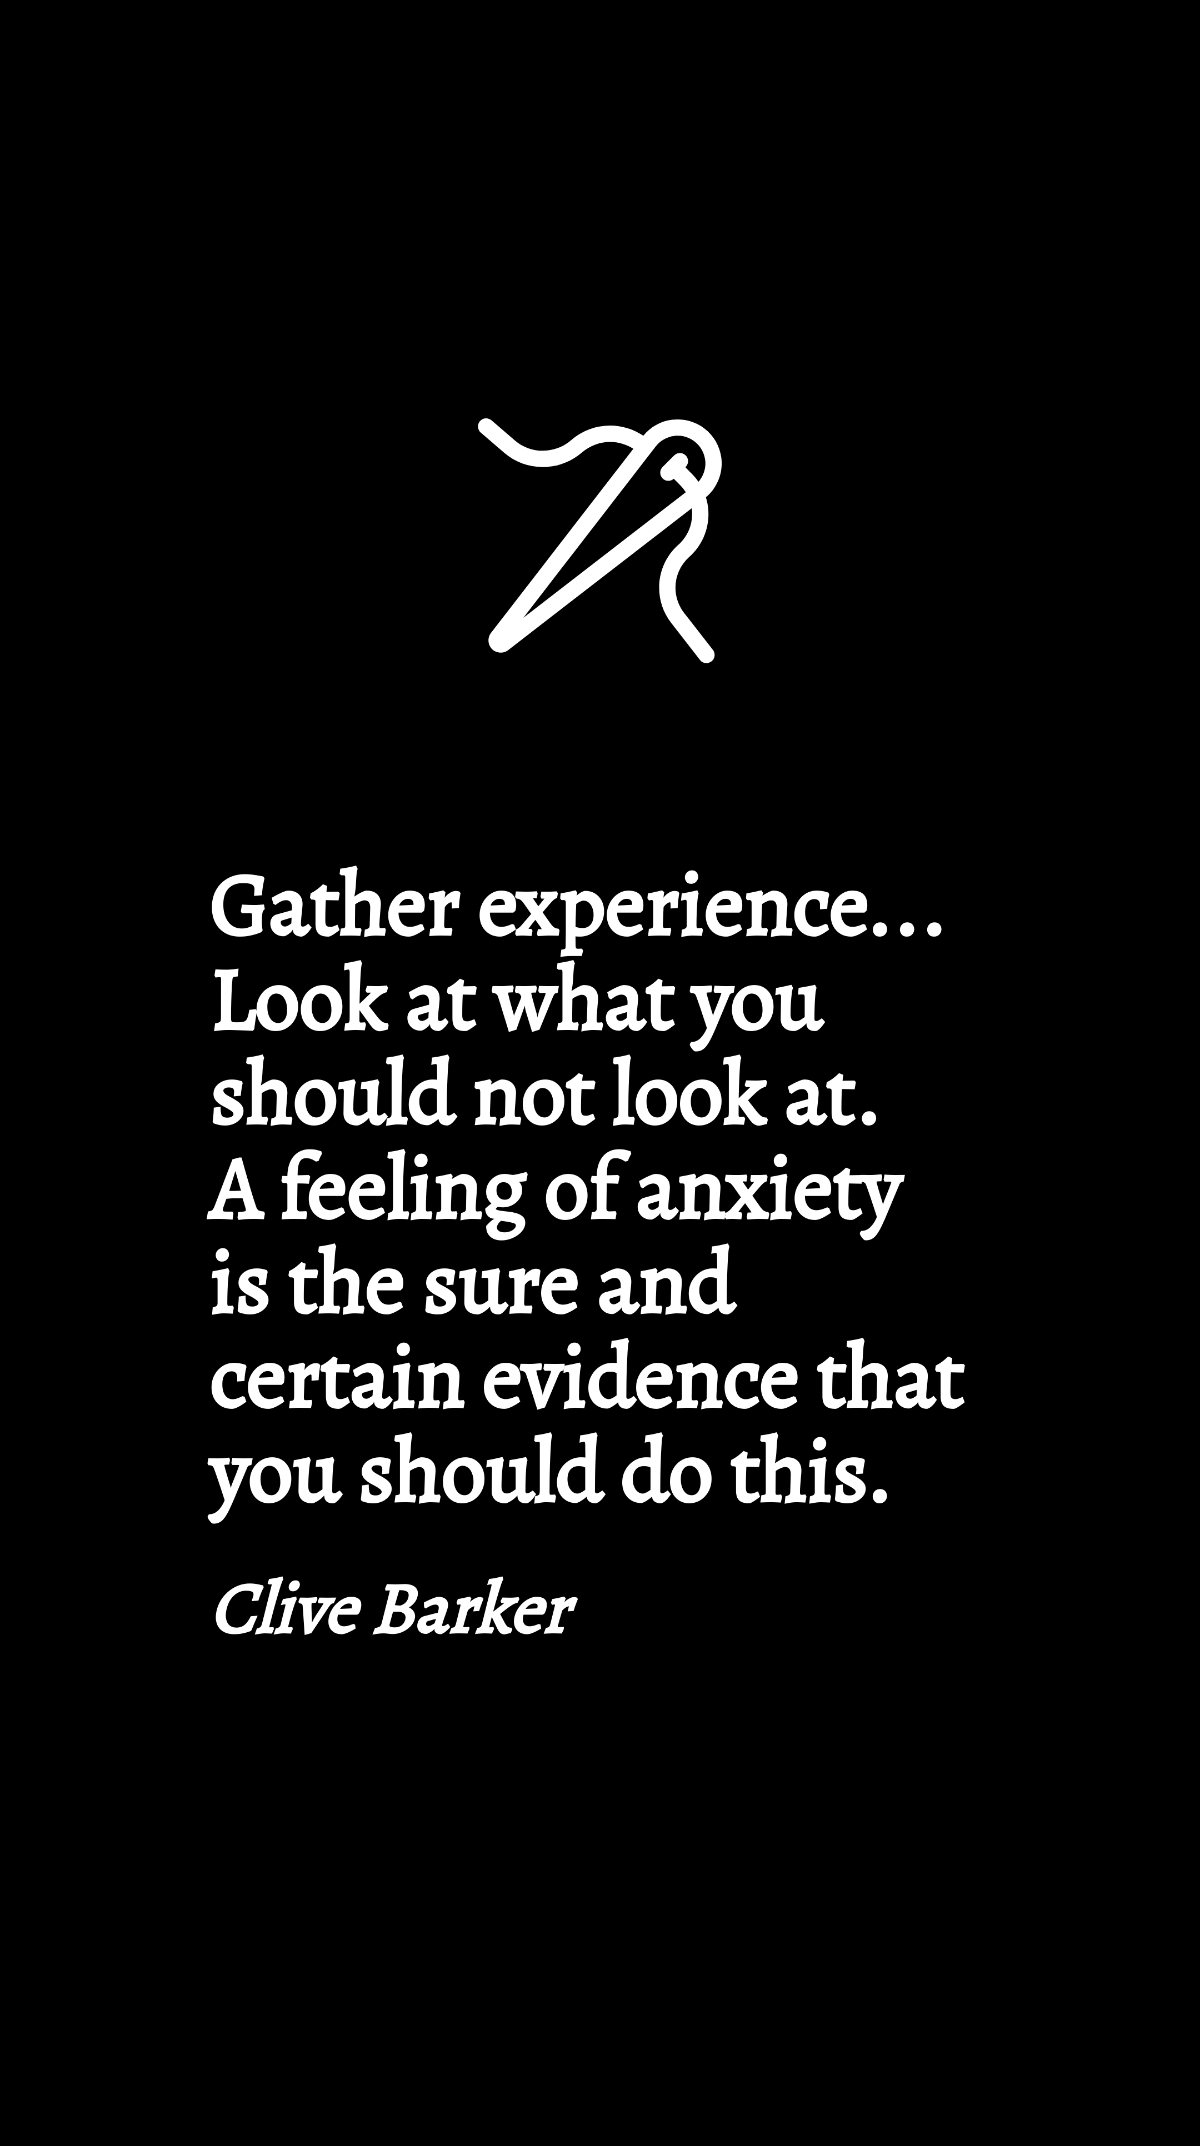 Free Clive Barker - Gather experience... Look at what you should not look at. A feeling of anxiety is the sure and certain evidence that you should do this. Template